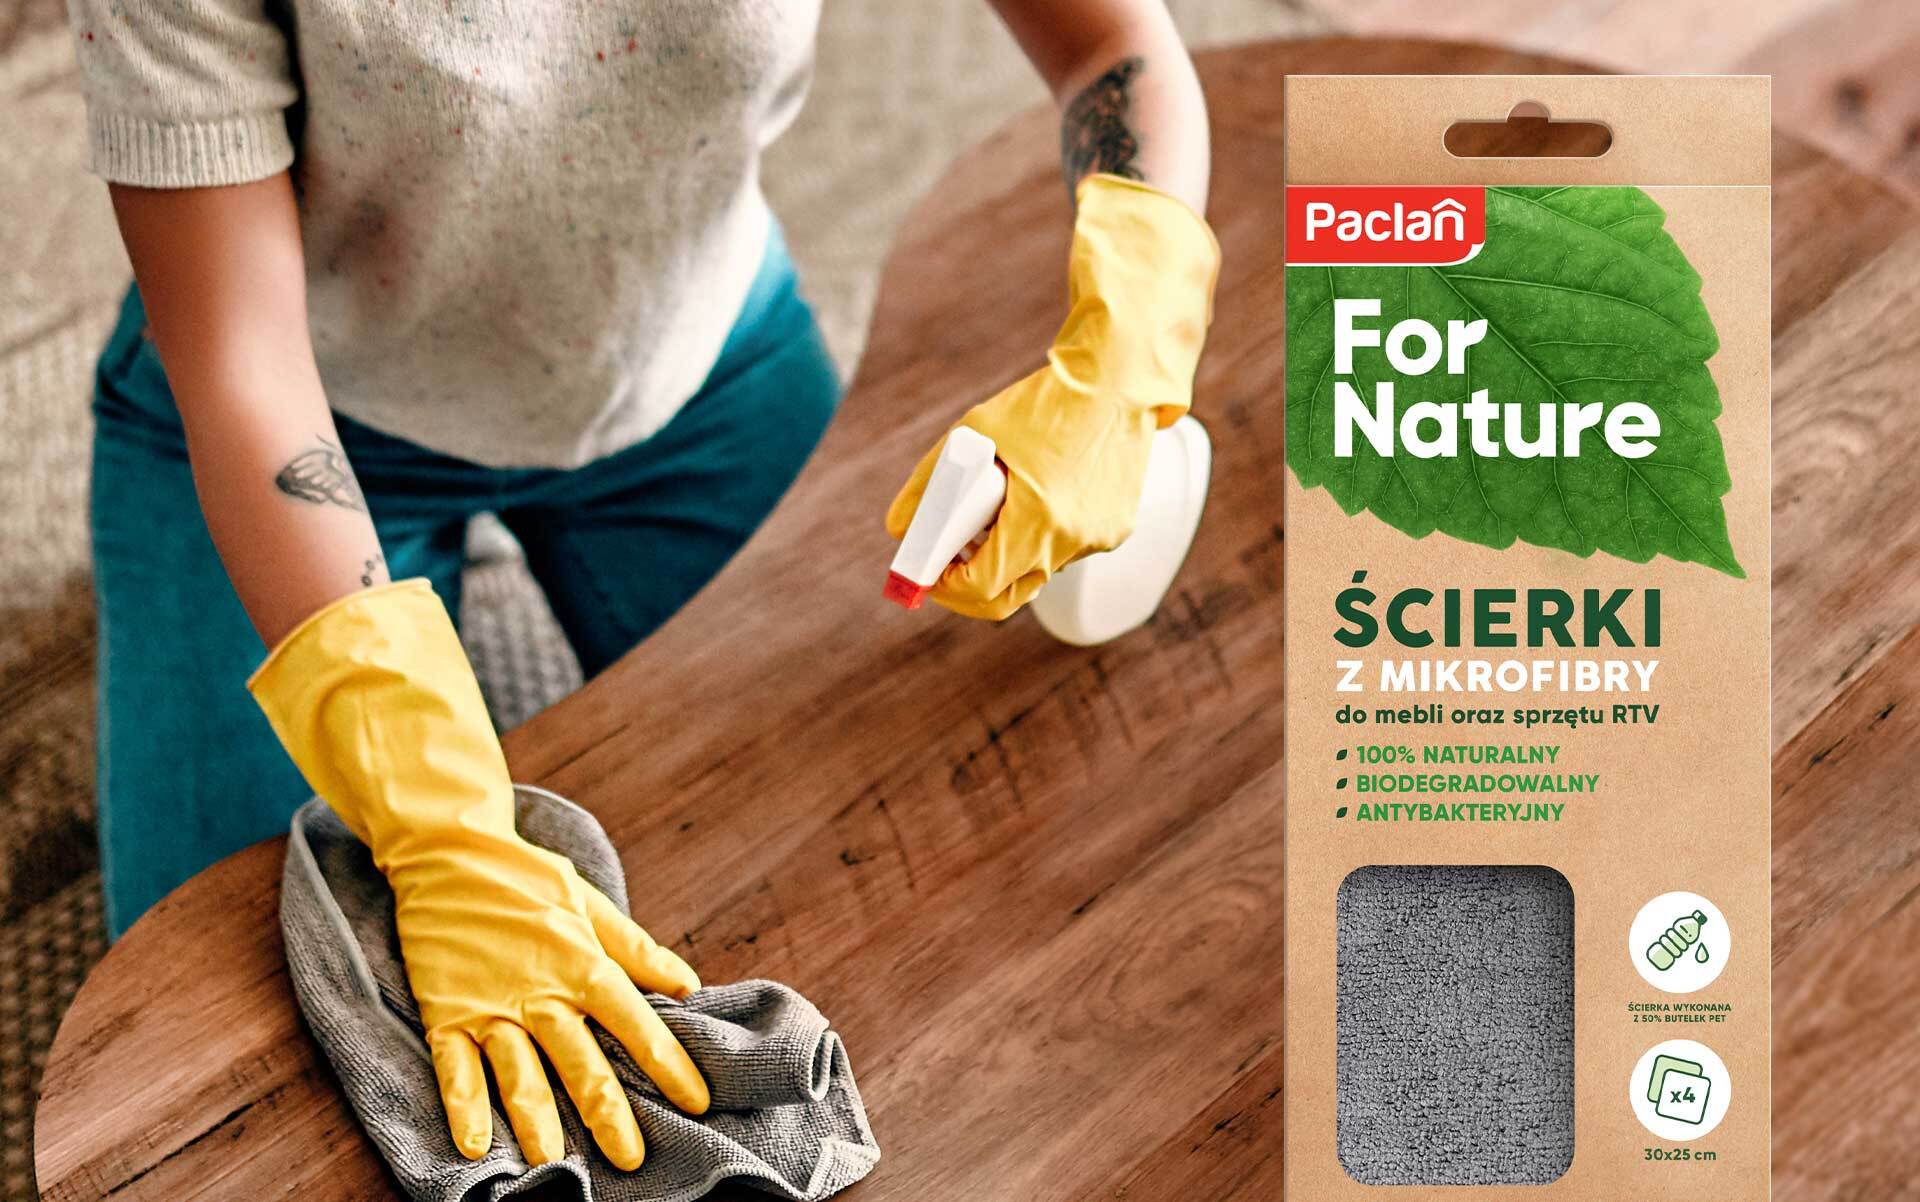 Woman wiping the table and ecological design of Paclan For Nature packaging.